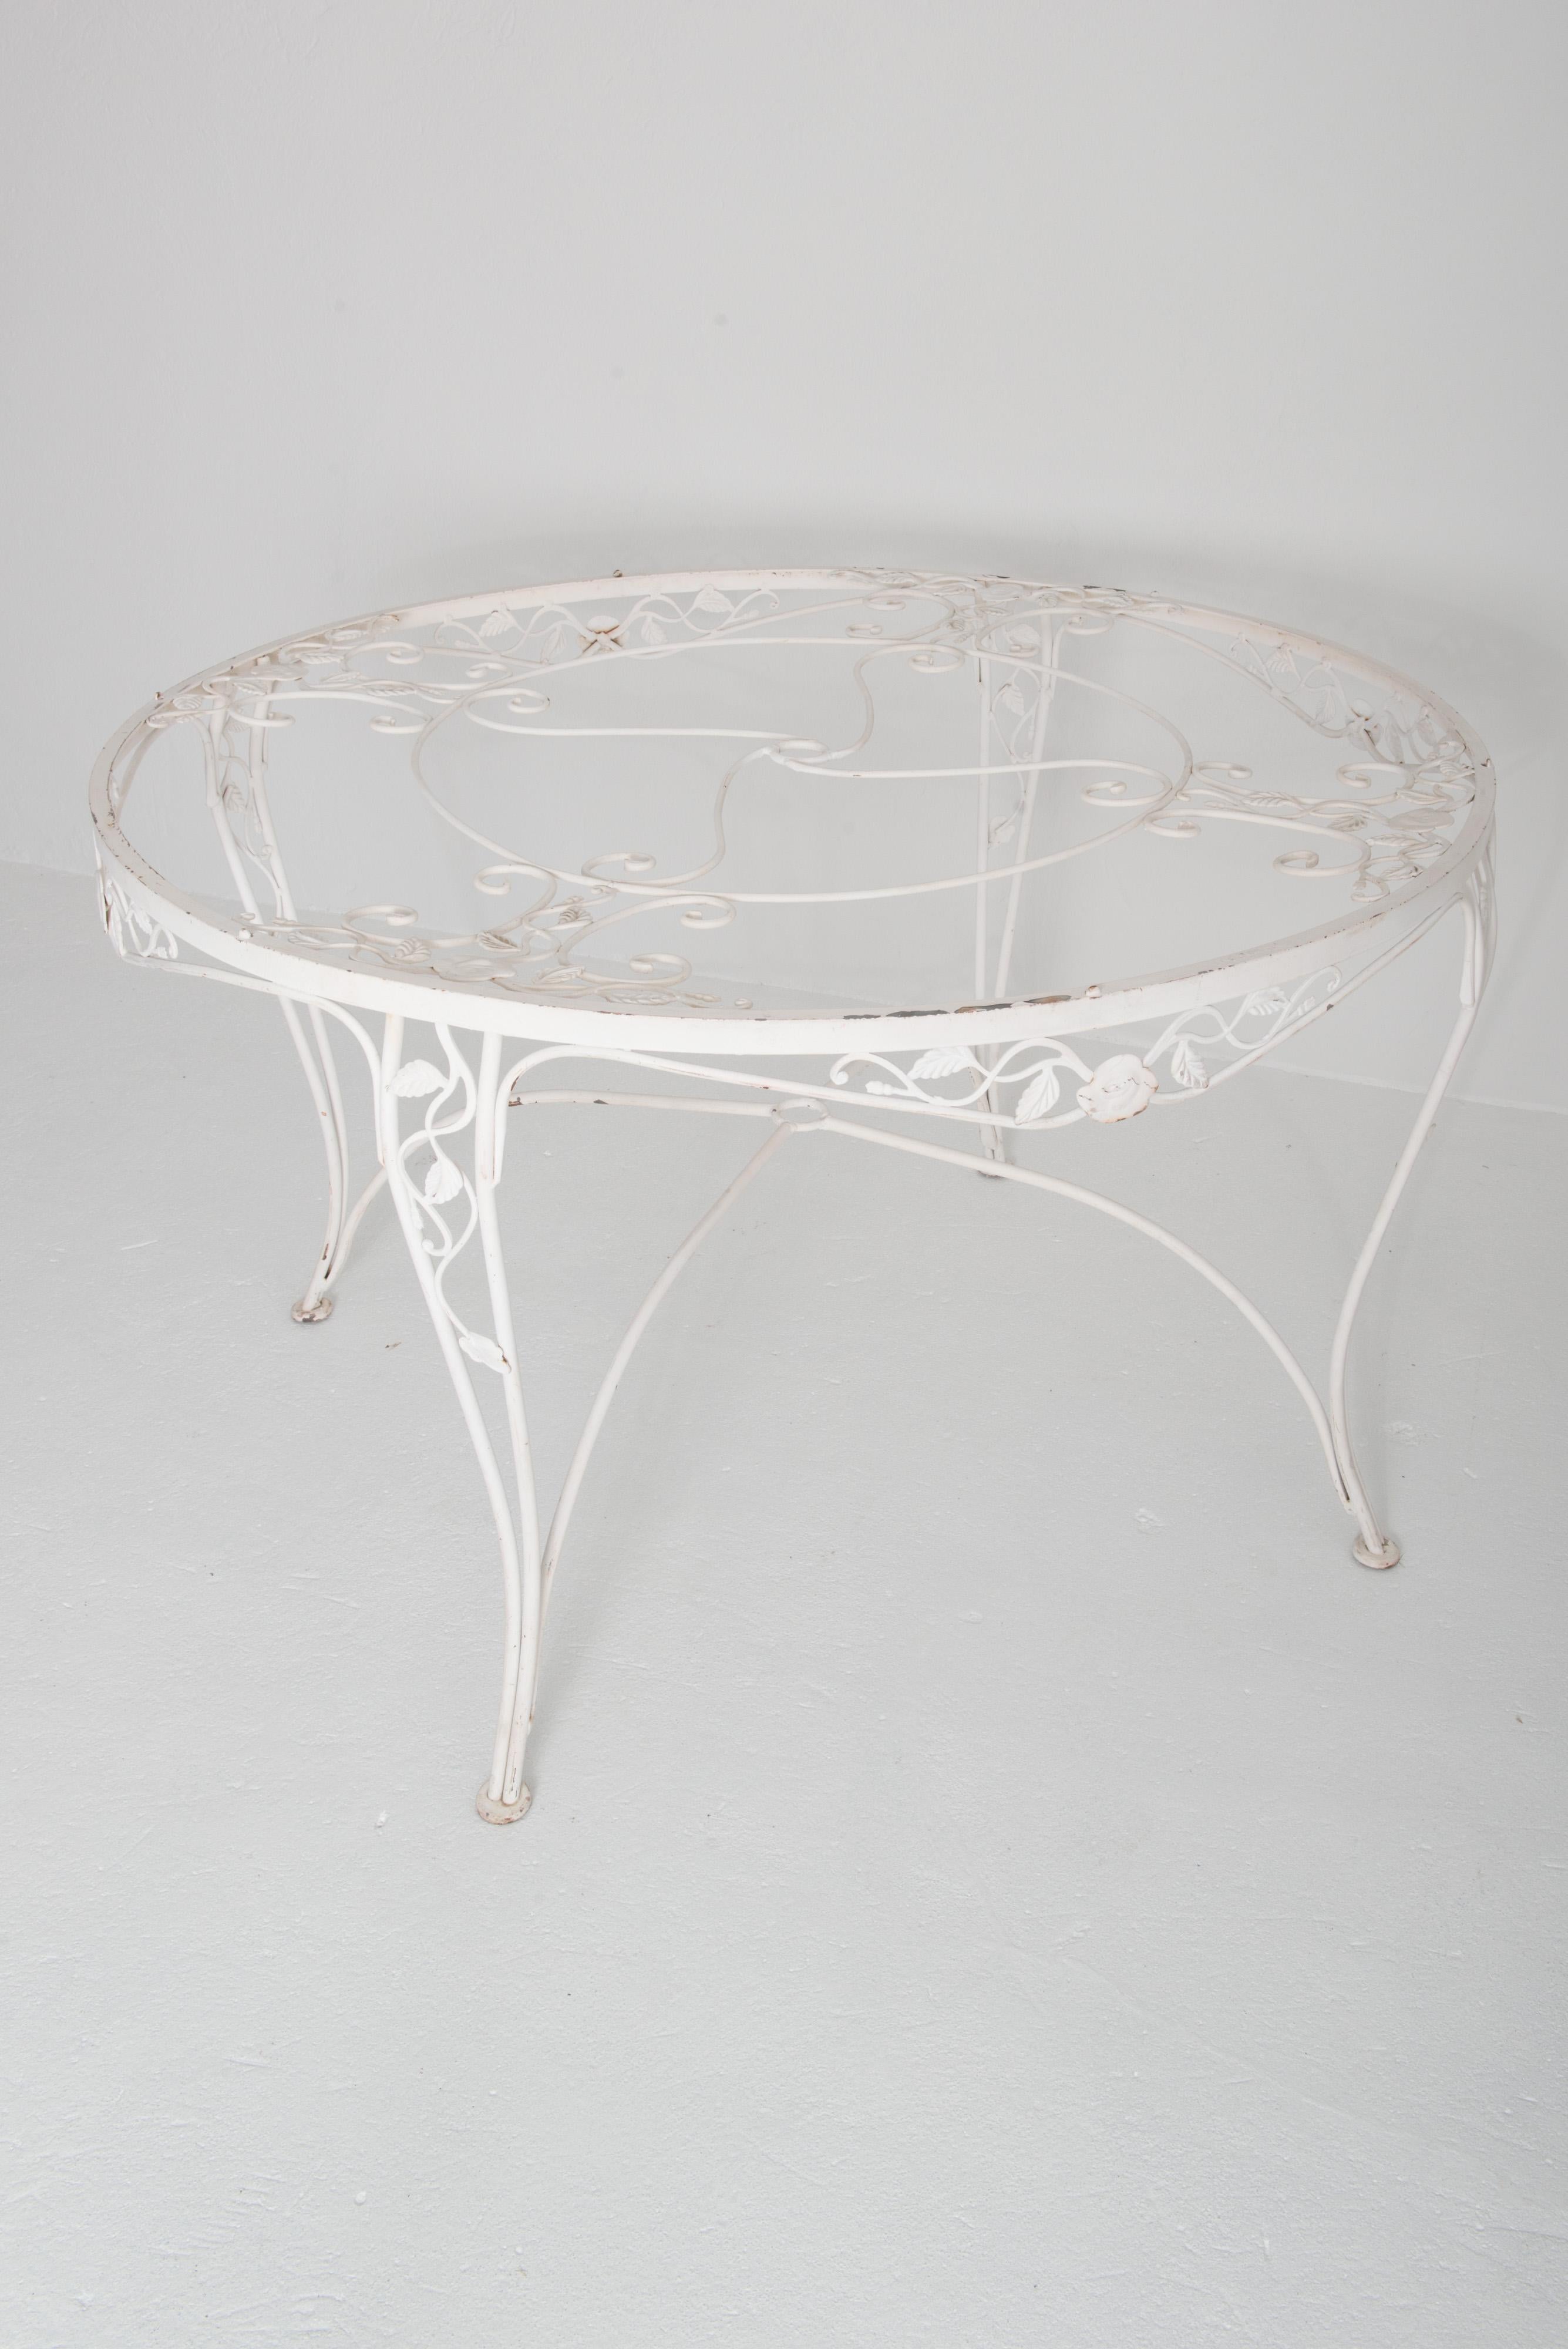 Woodard Chantilly Rose Wrought Iron Dining Table In Good Condition For Sale In Stamford, CT